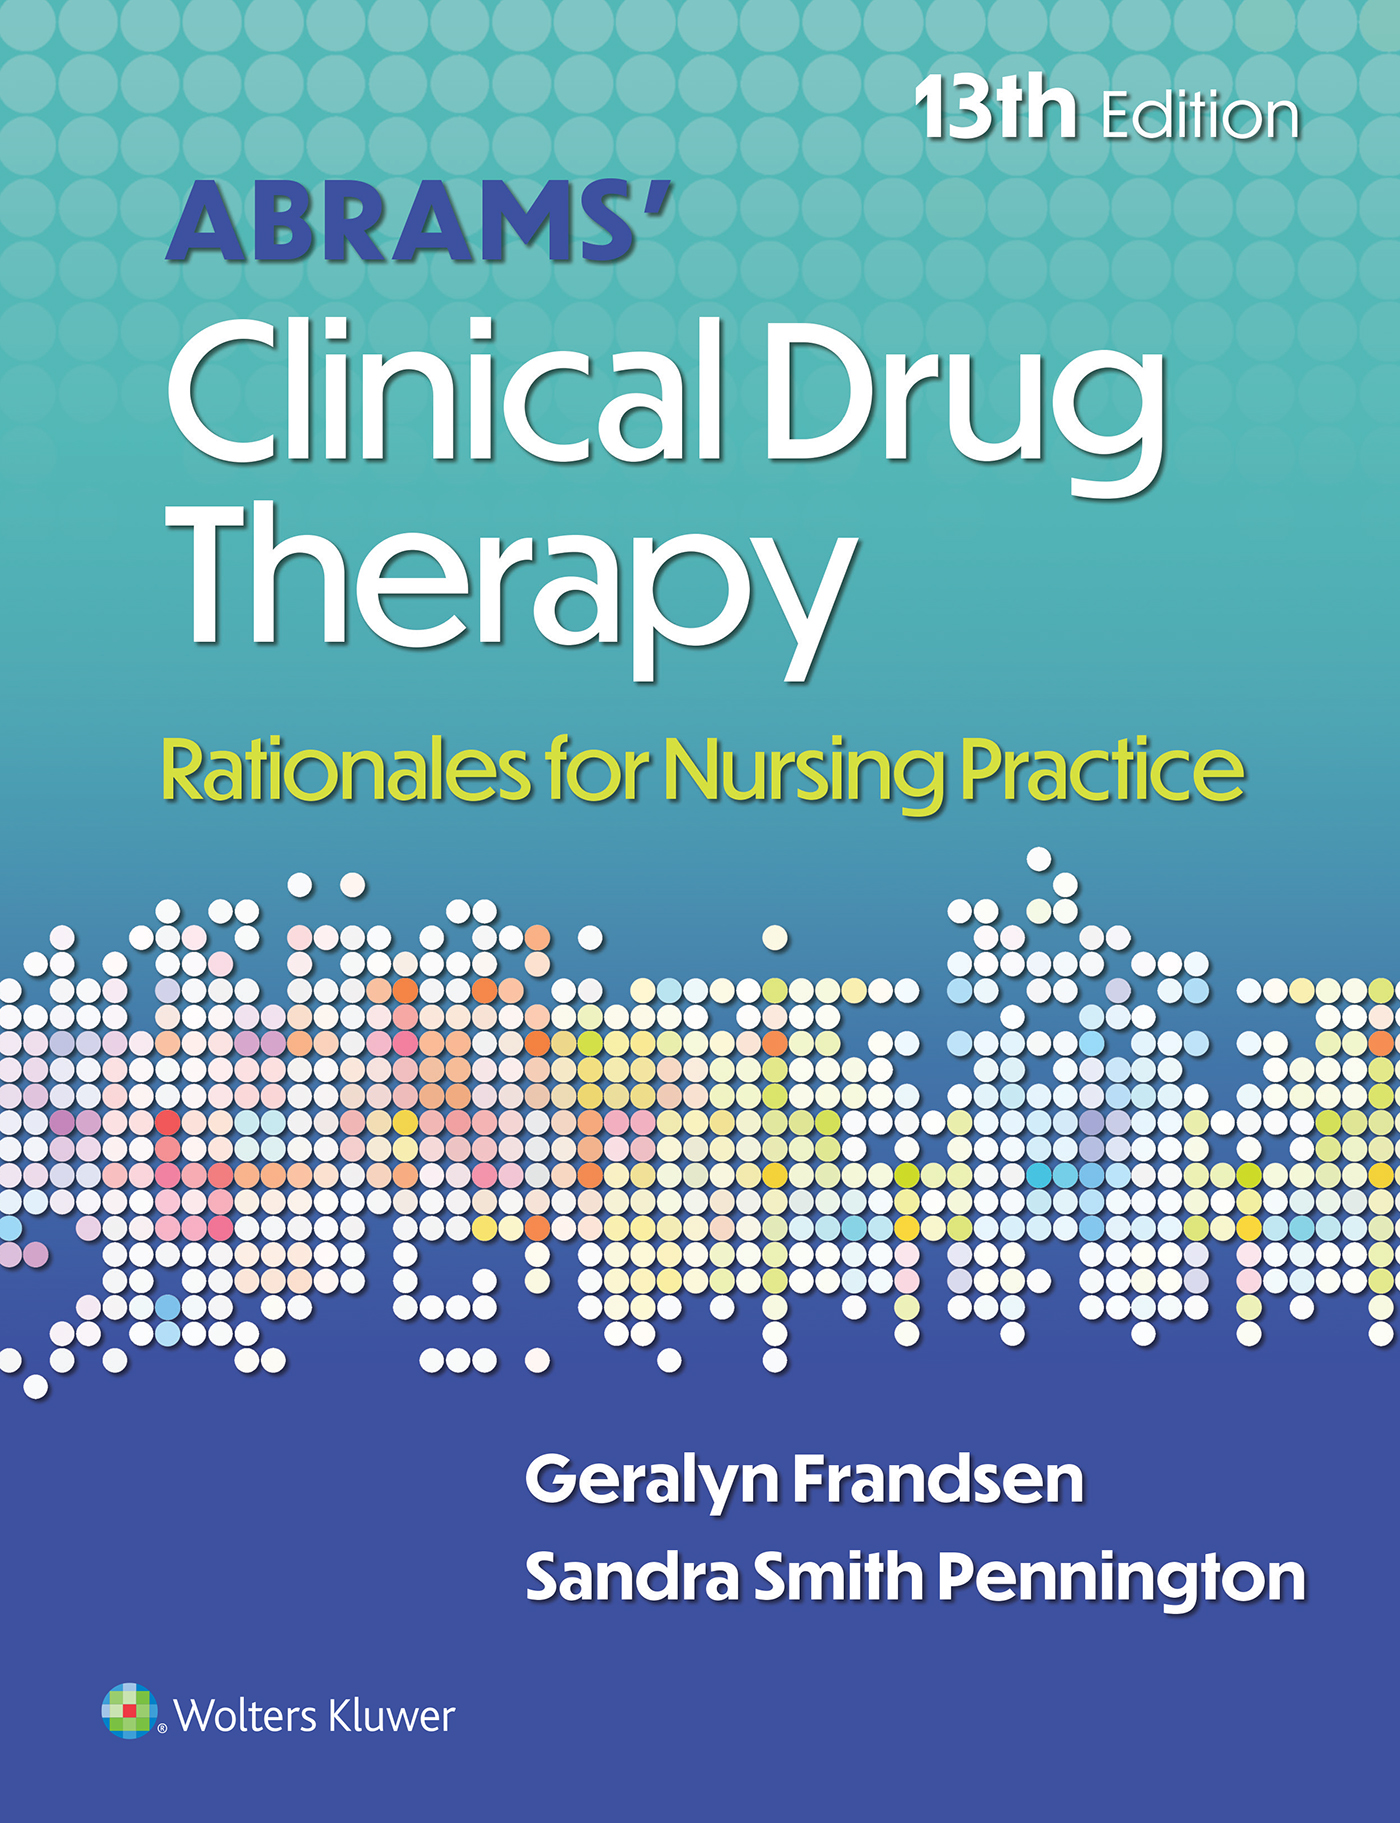 Abrams’ Clinical Drug Therapy: Rationales for Nursing Practice, 13th Edition